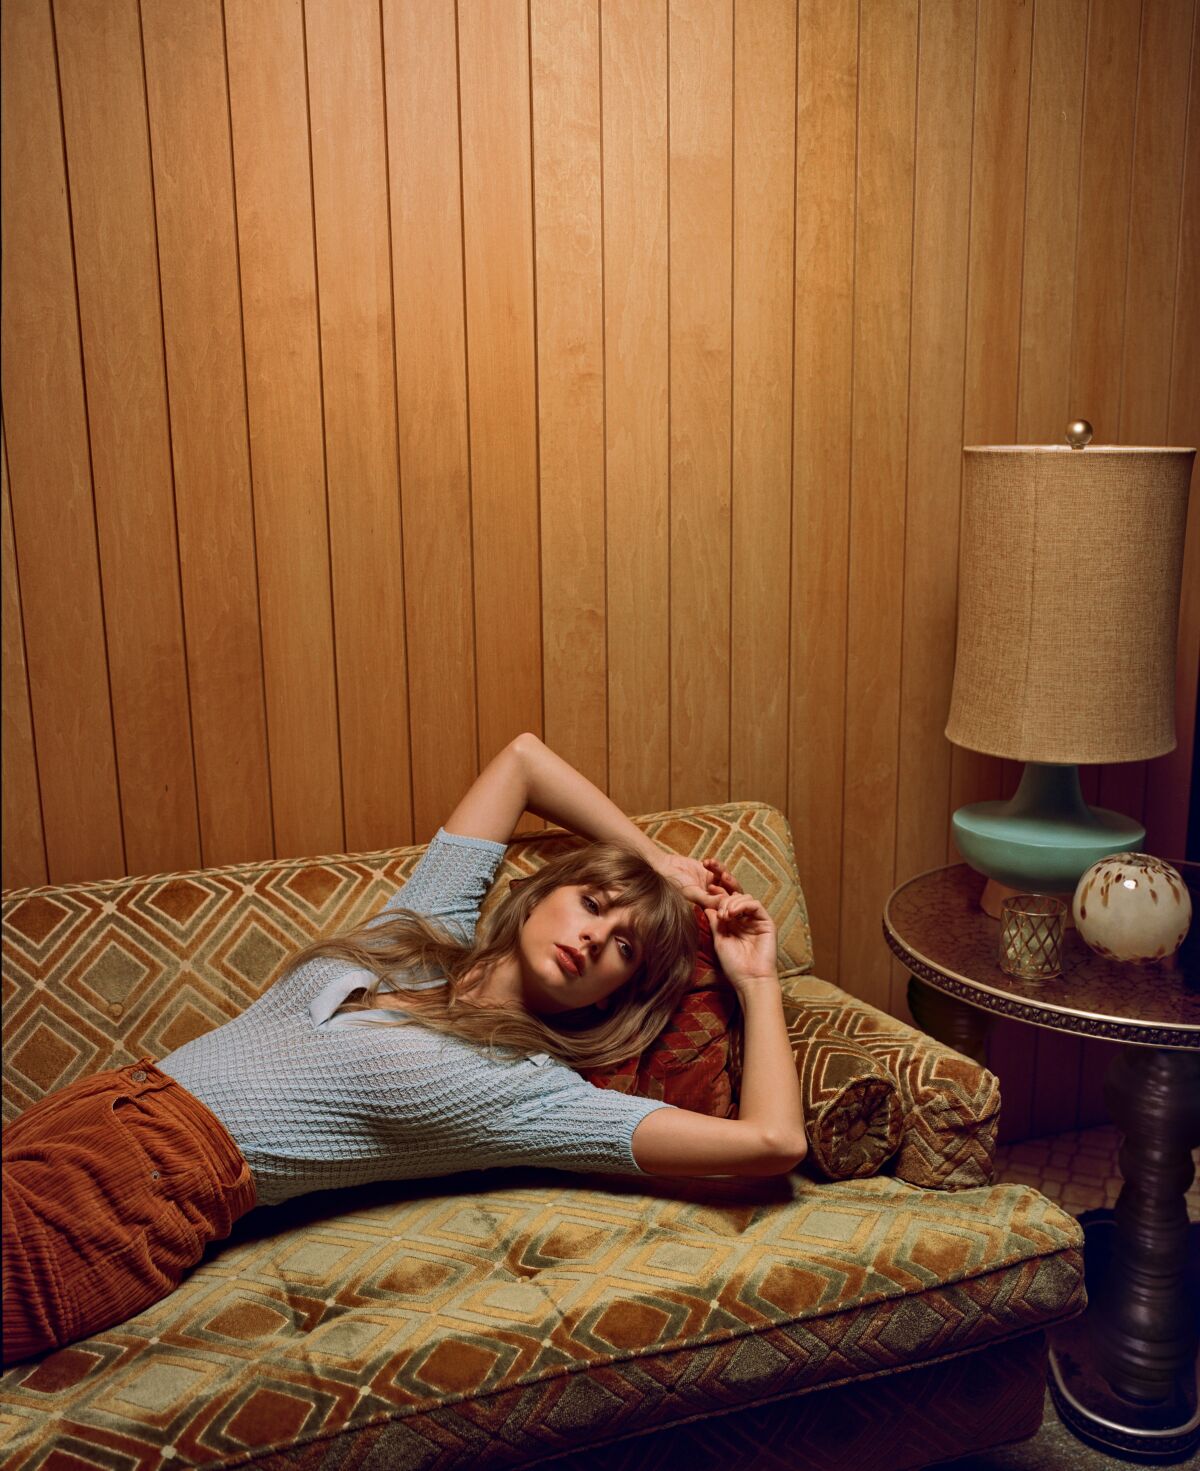 A woman lying on a sofa in a paneled room